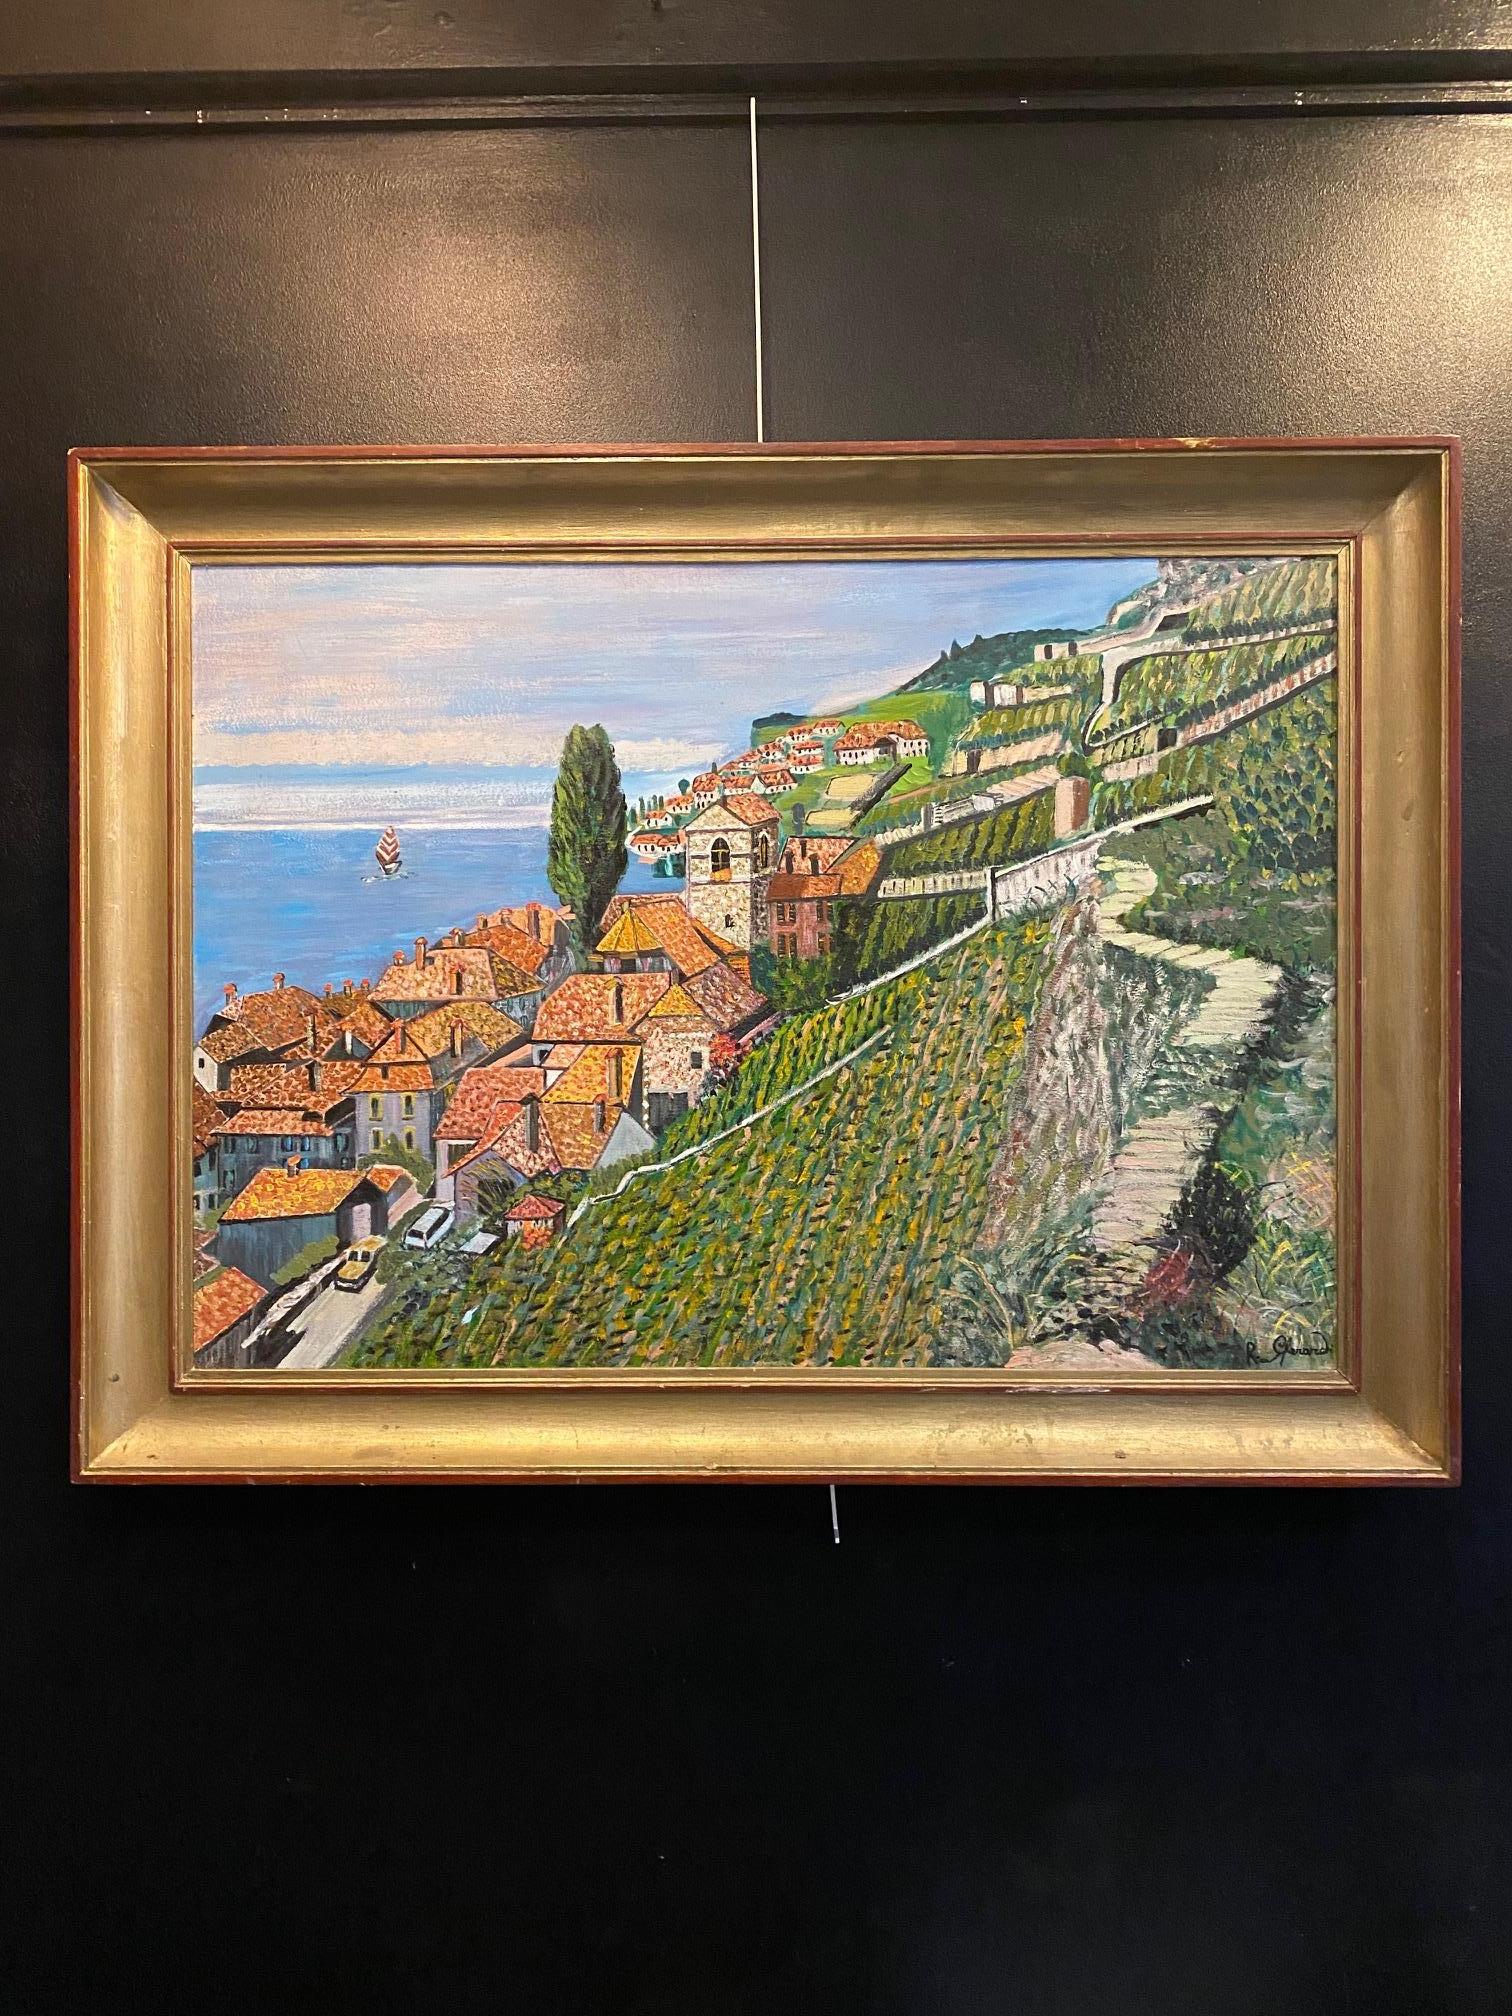 Work on canvas with frame. Total size with frame is 135 x 102 cm 

Roberto Gherardi is an Italian-Geneva painter born in 1933 in Ascensione in northern Italy, near Bergamo.
The post-war period being harsh, poverty strikes his family and forces him